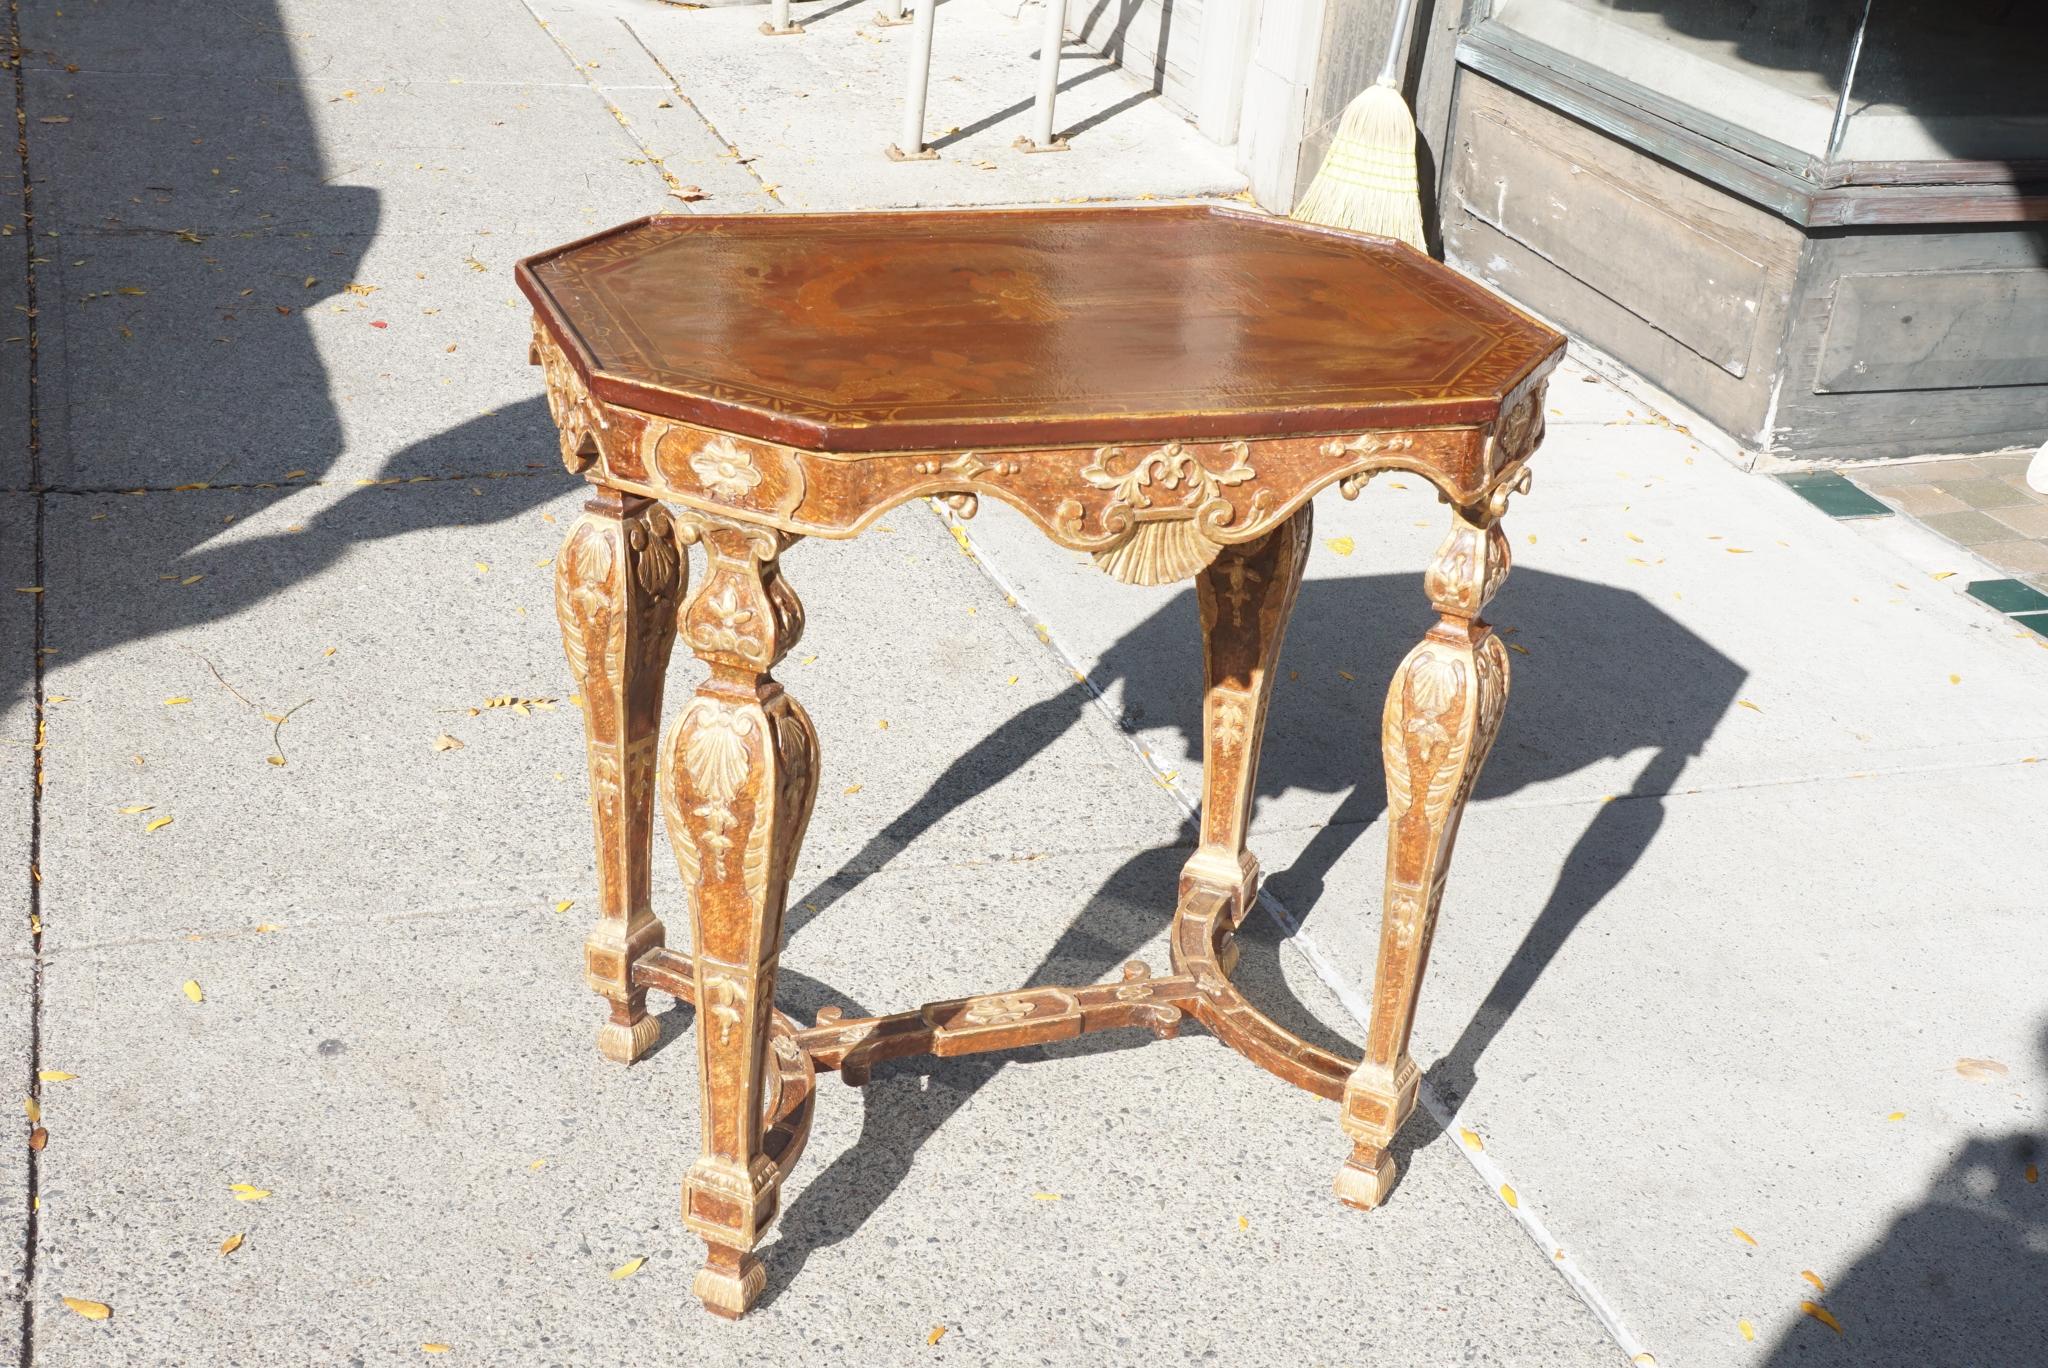 This table crafted in carved painted and gilded wood was made in Italy, circa 1700. The style is fully Baroque and at one point may have had a specimen marble top. The present top is from circa 1880-1900 (see last two photos) and is most likely